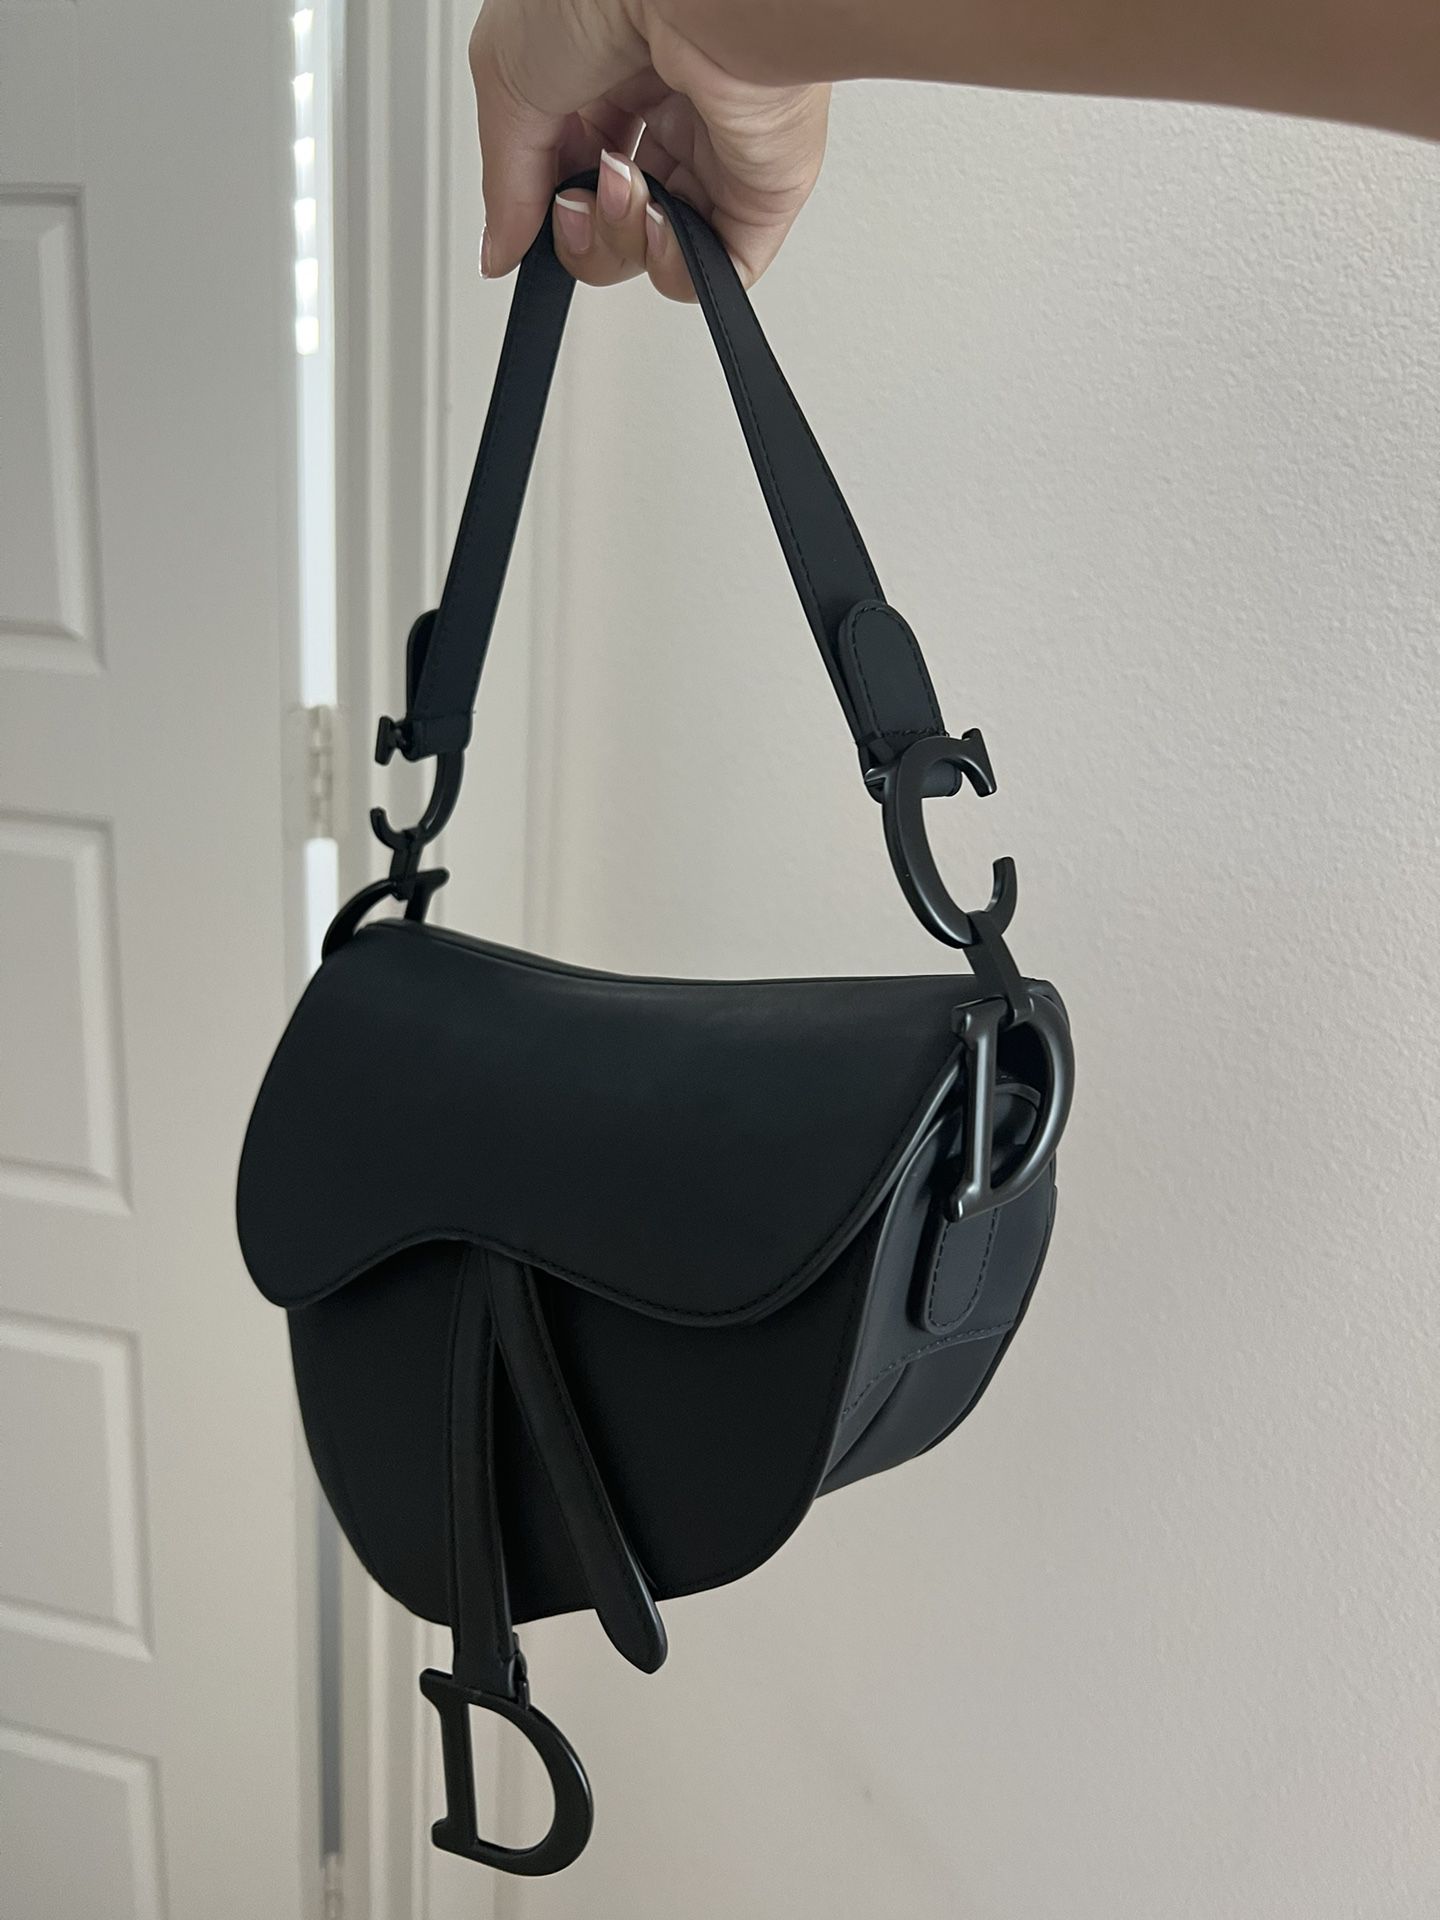 Dior Side Bag for Sale in Carson, CA - OfferUp